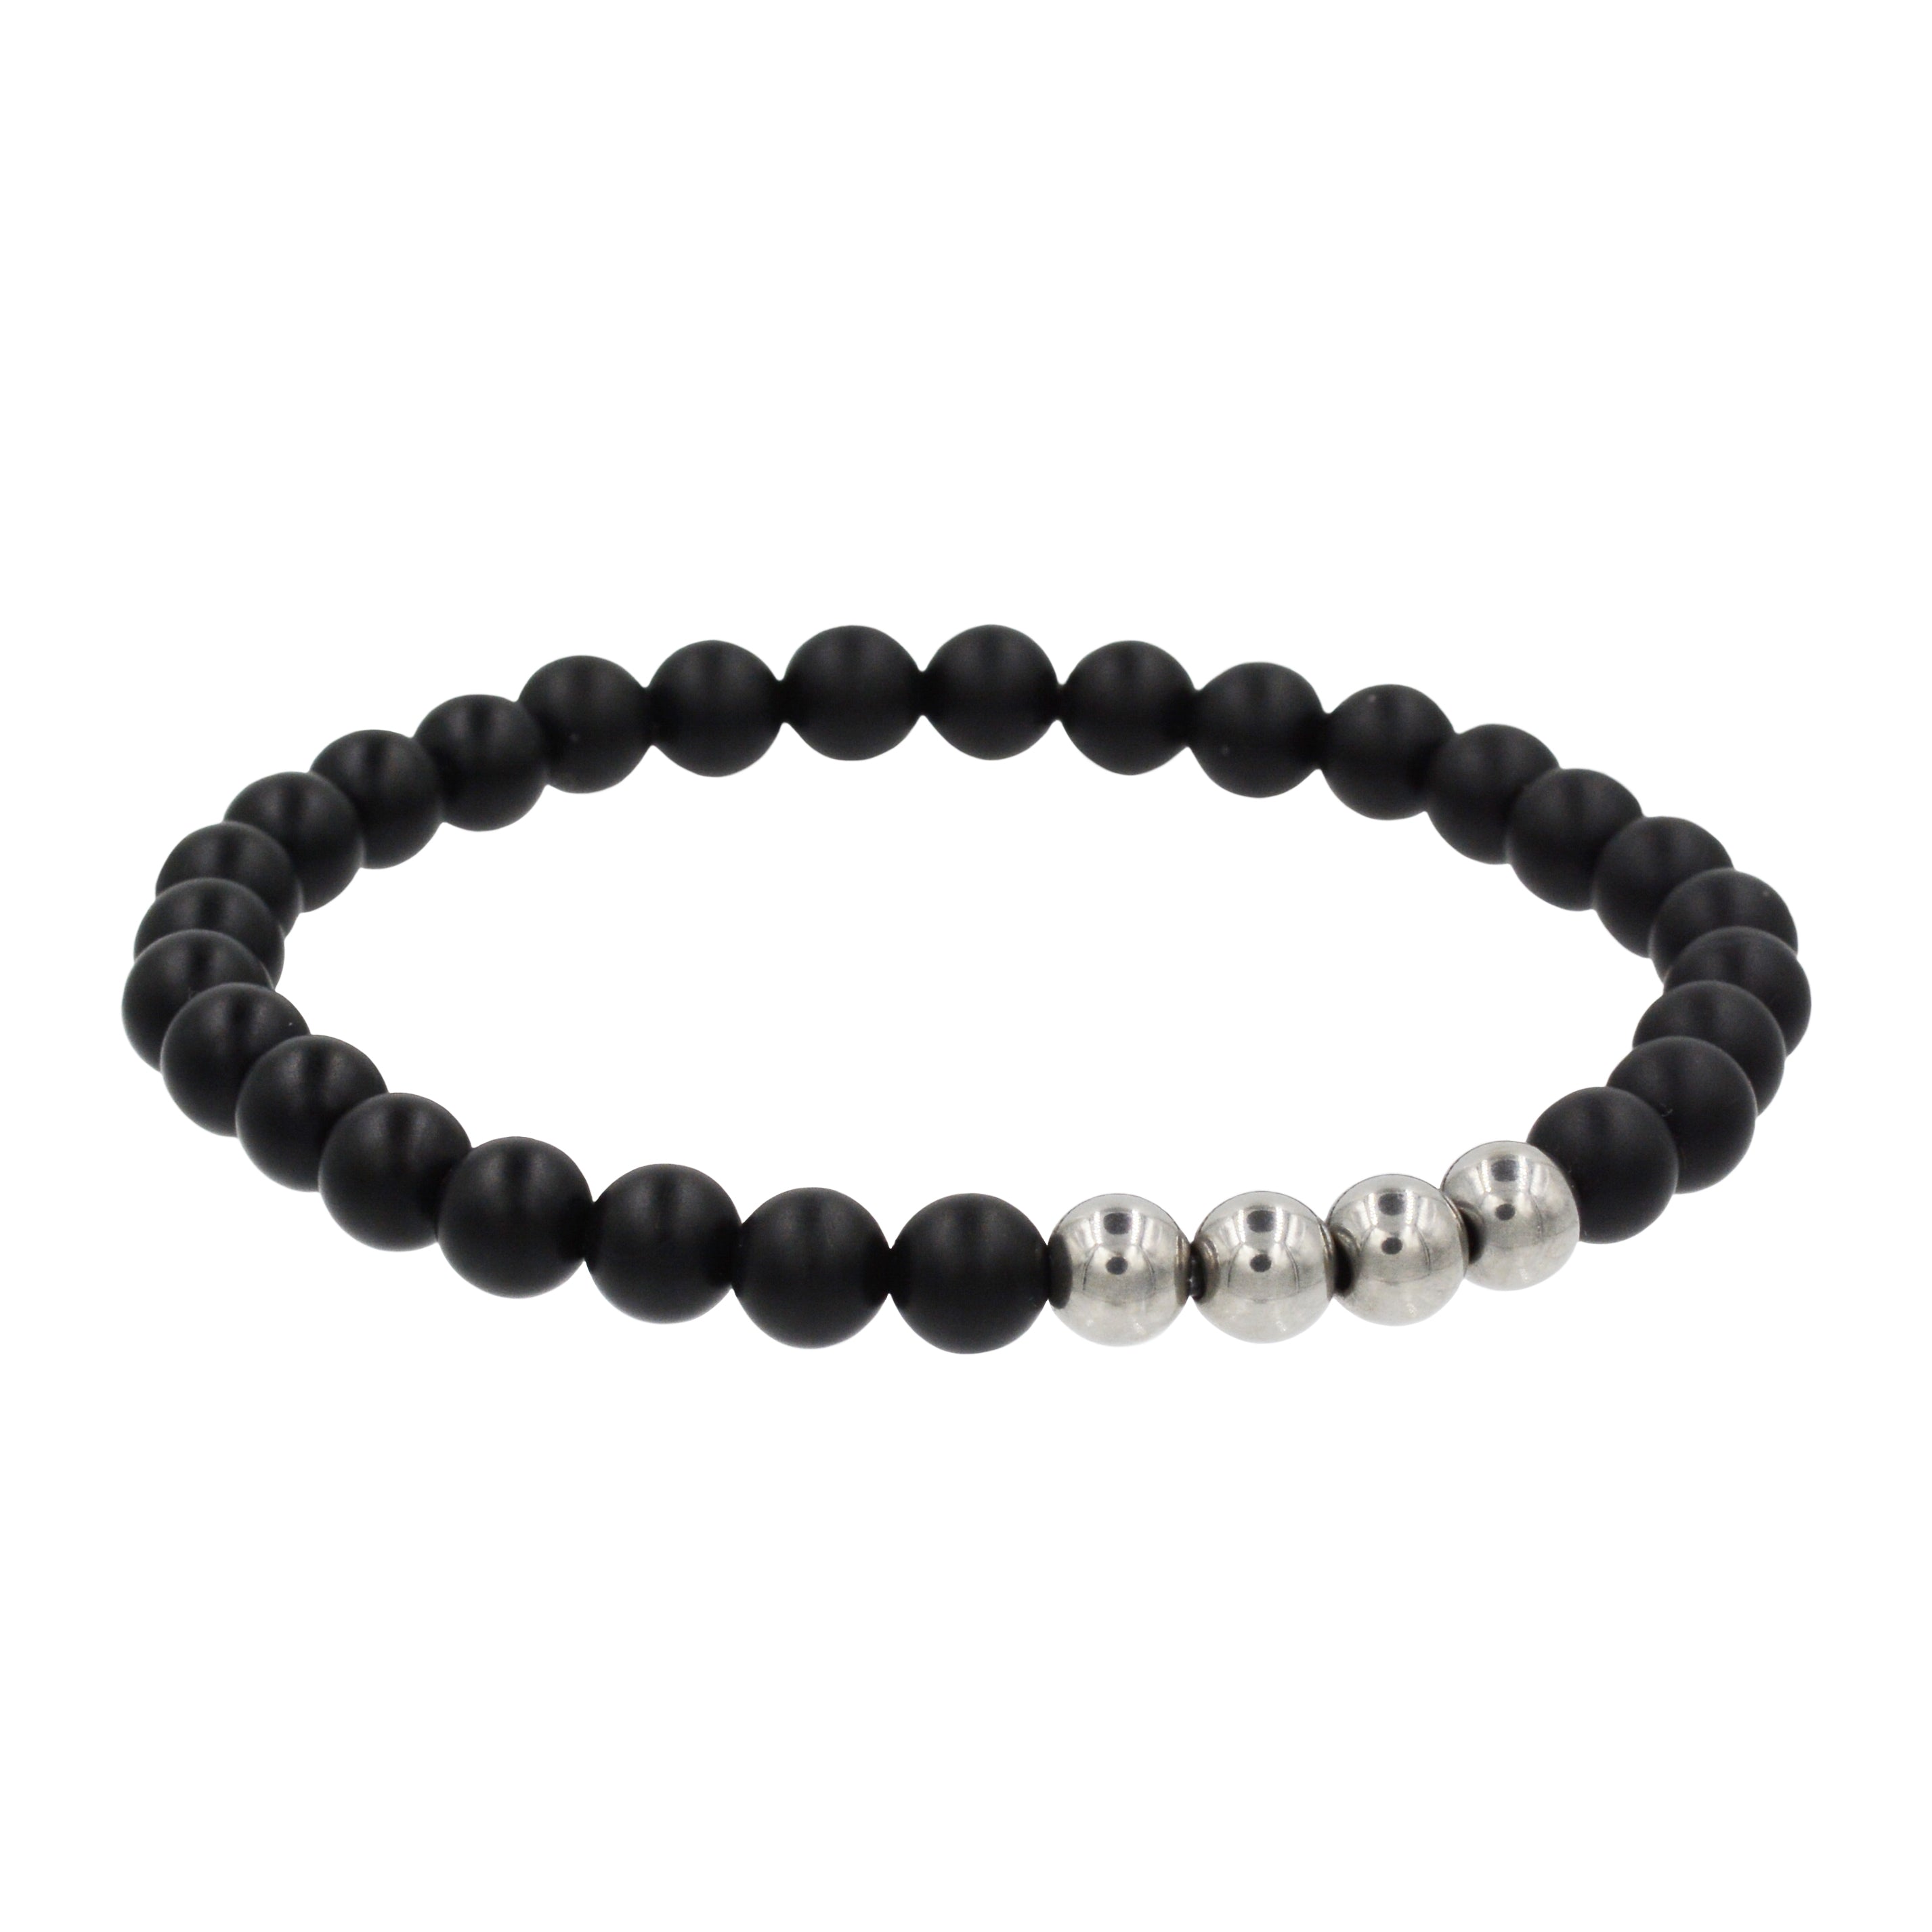 Black Agate Bracelet - for grounding and protection